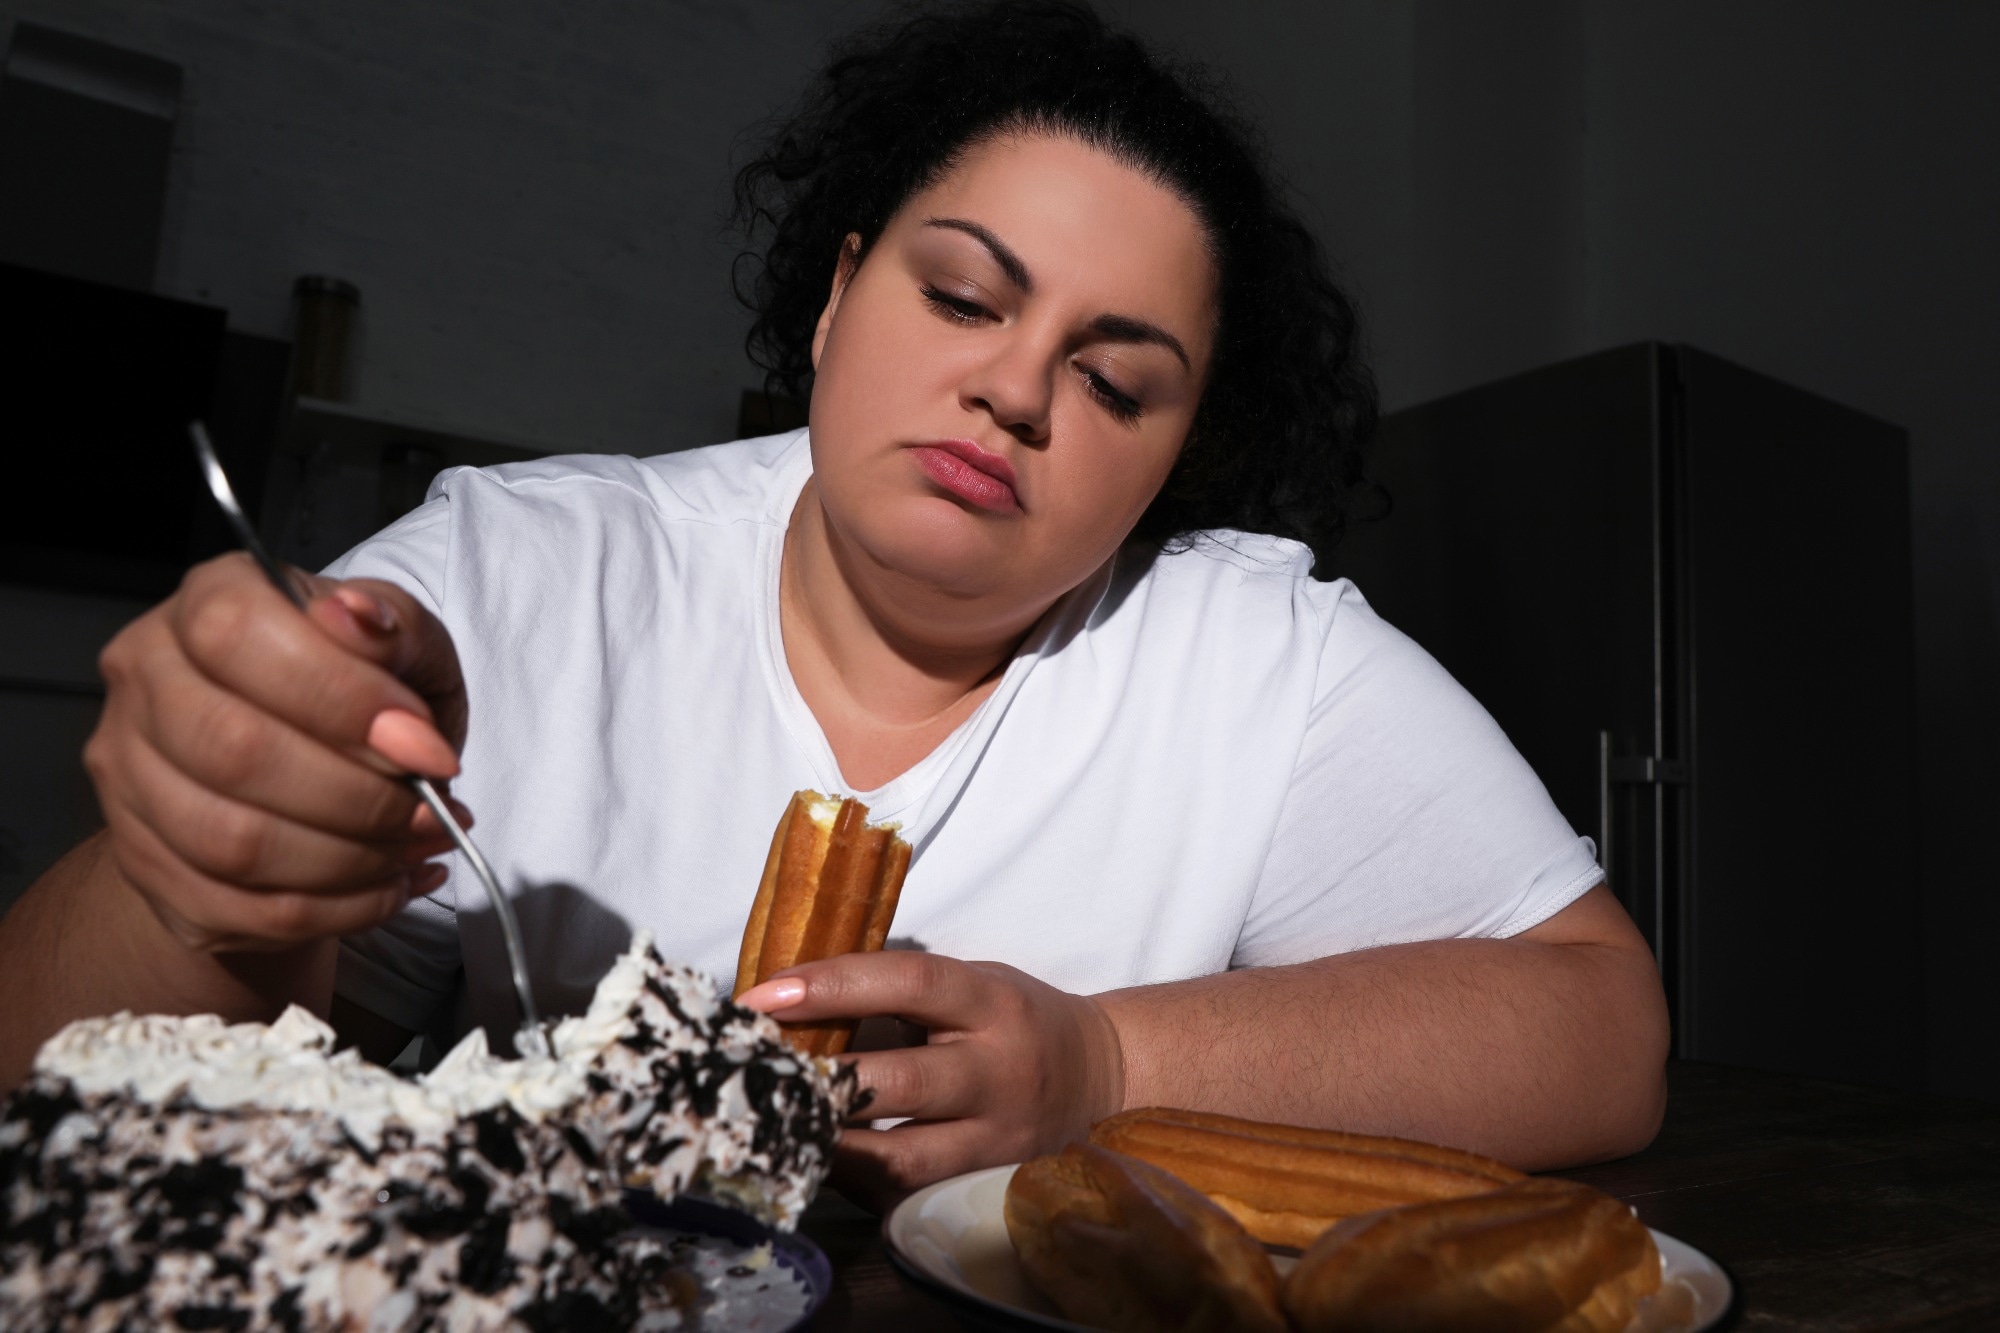 Research supports weight-neutral care for women with binge eating disorders